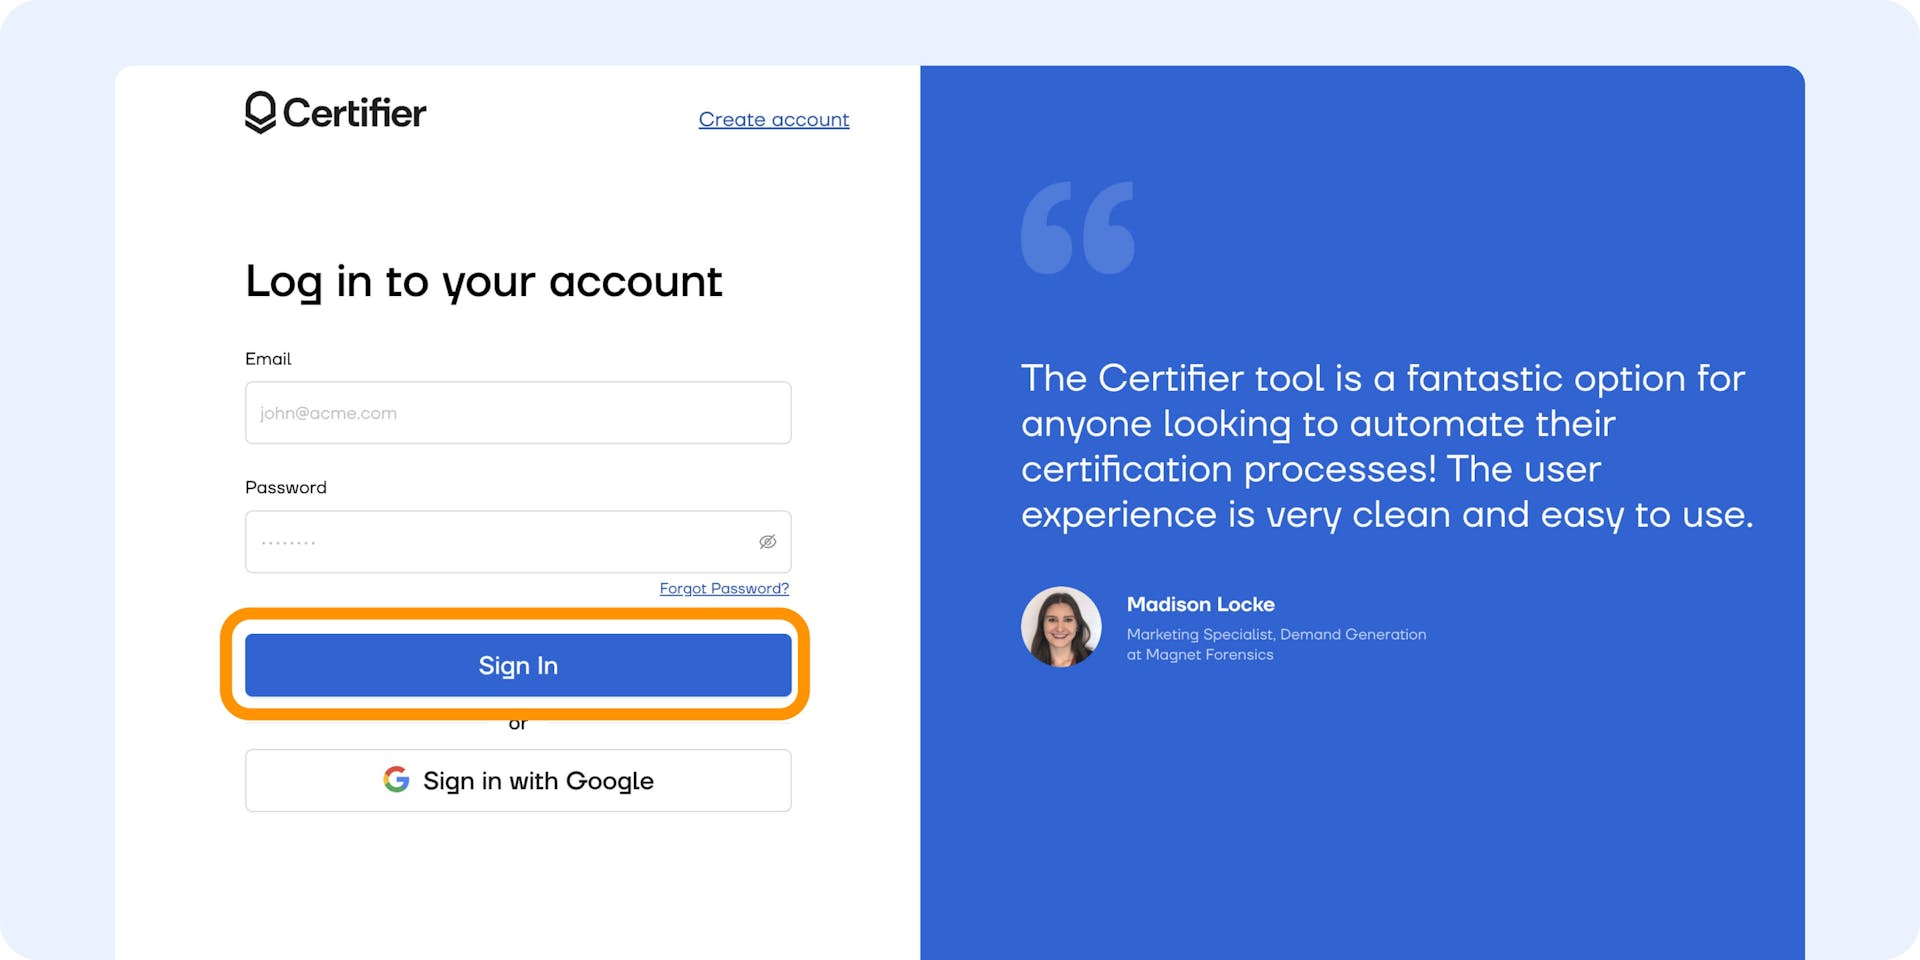 Sign-up page to create an account in Certifier and create LinkedIn credentials.